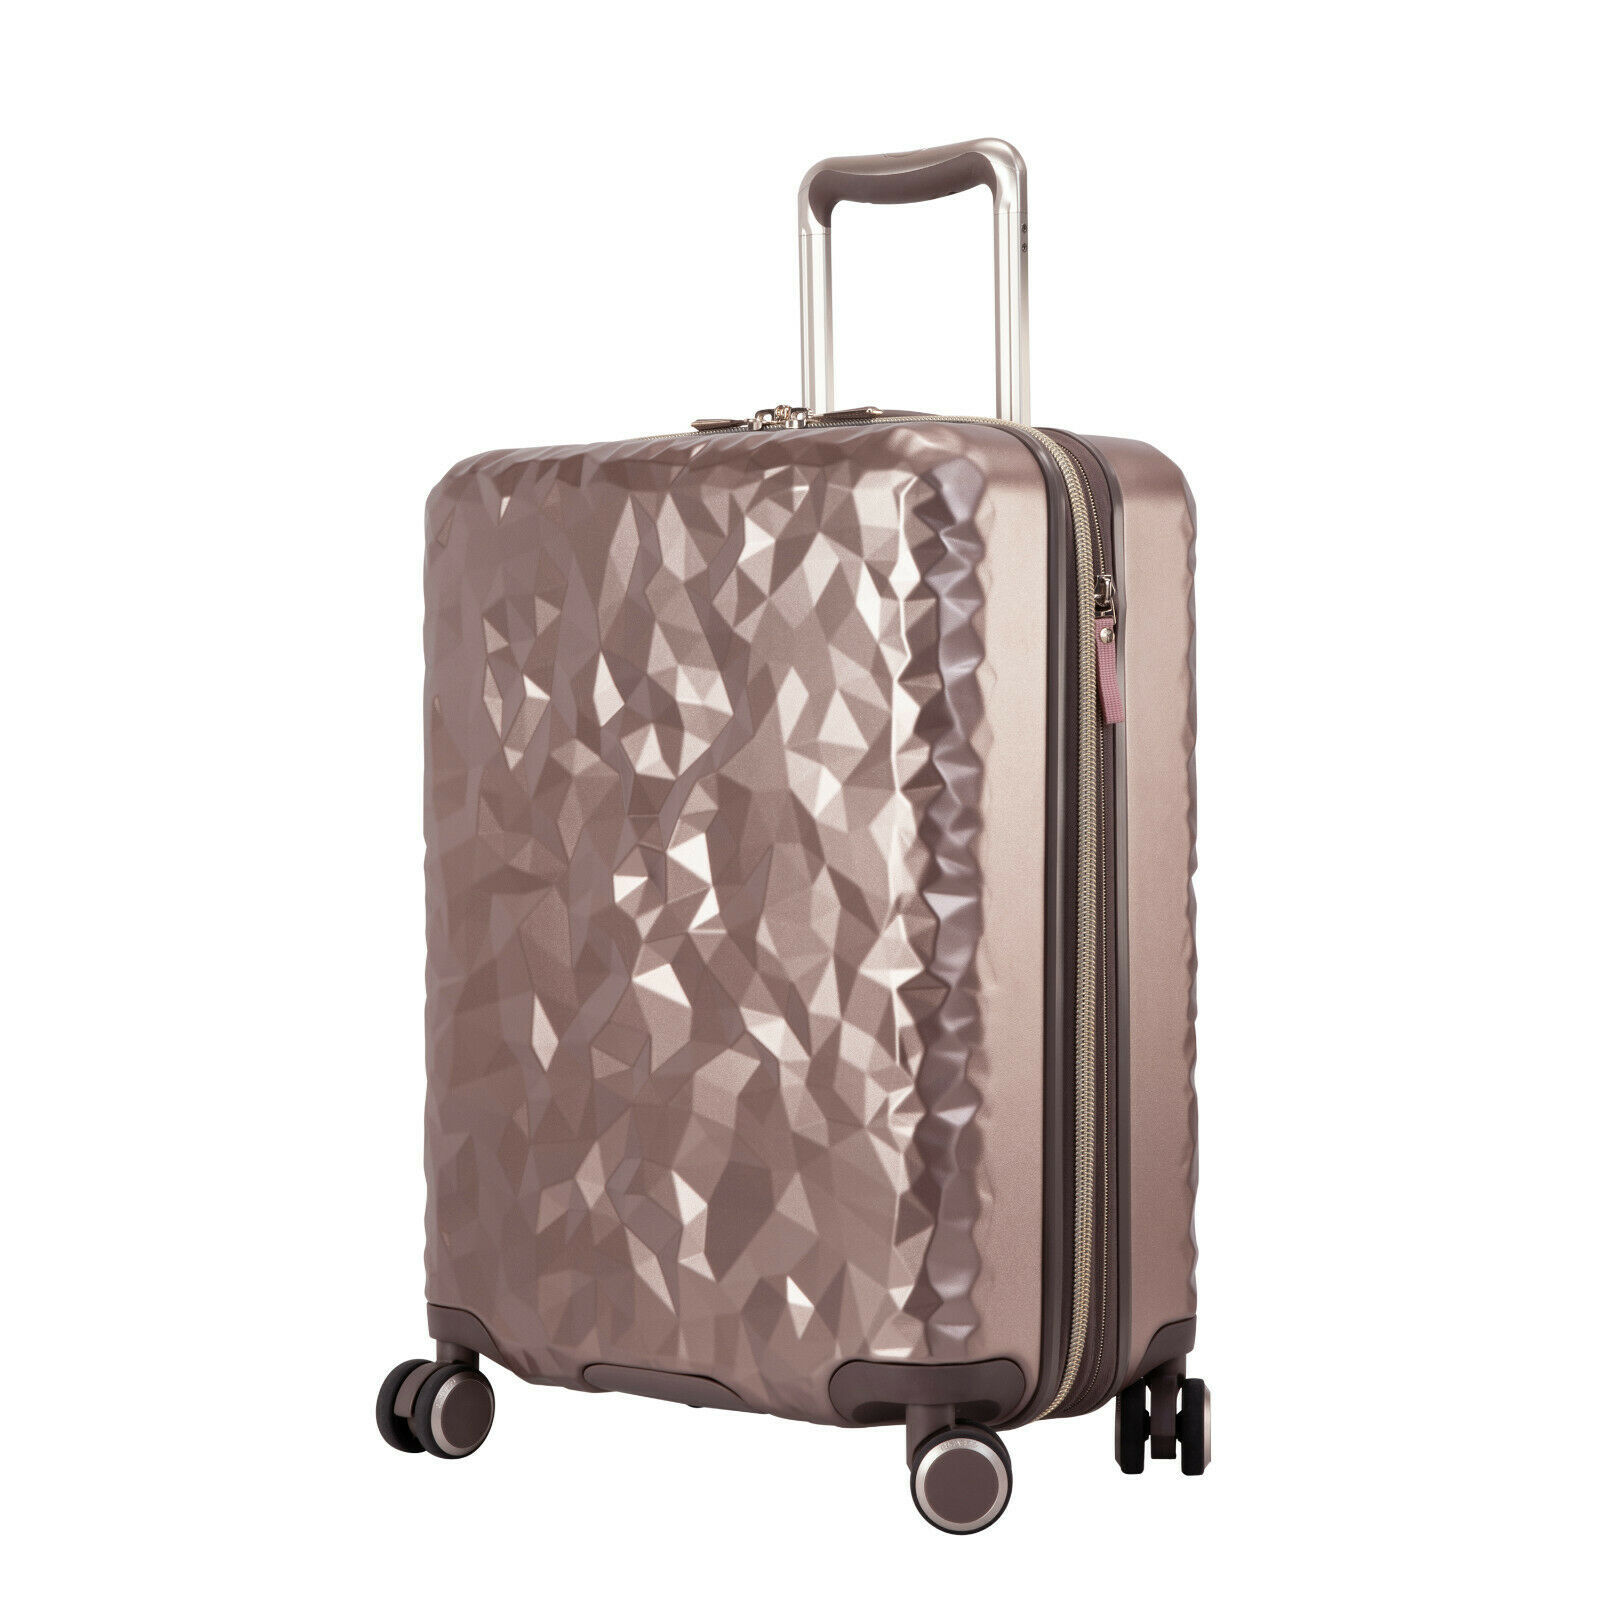 Ricardo Beverly Hills Indio Carry-On Suitcase in Topaz